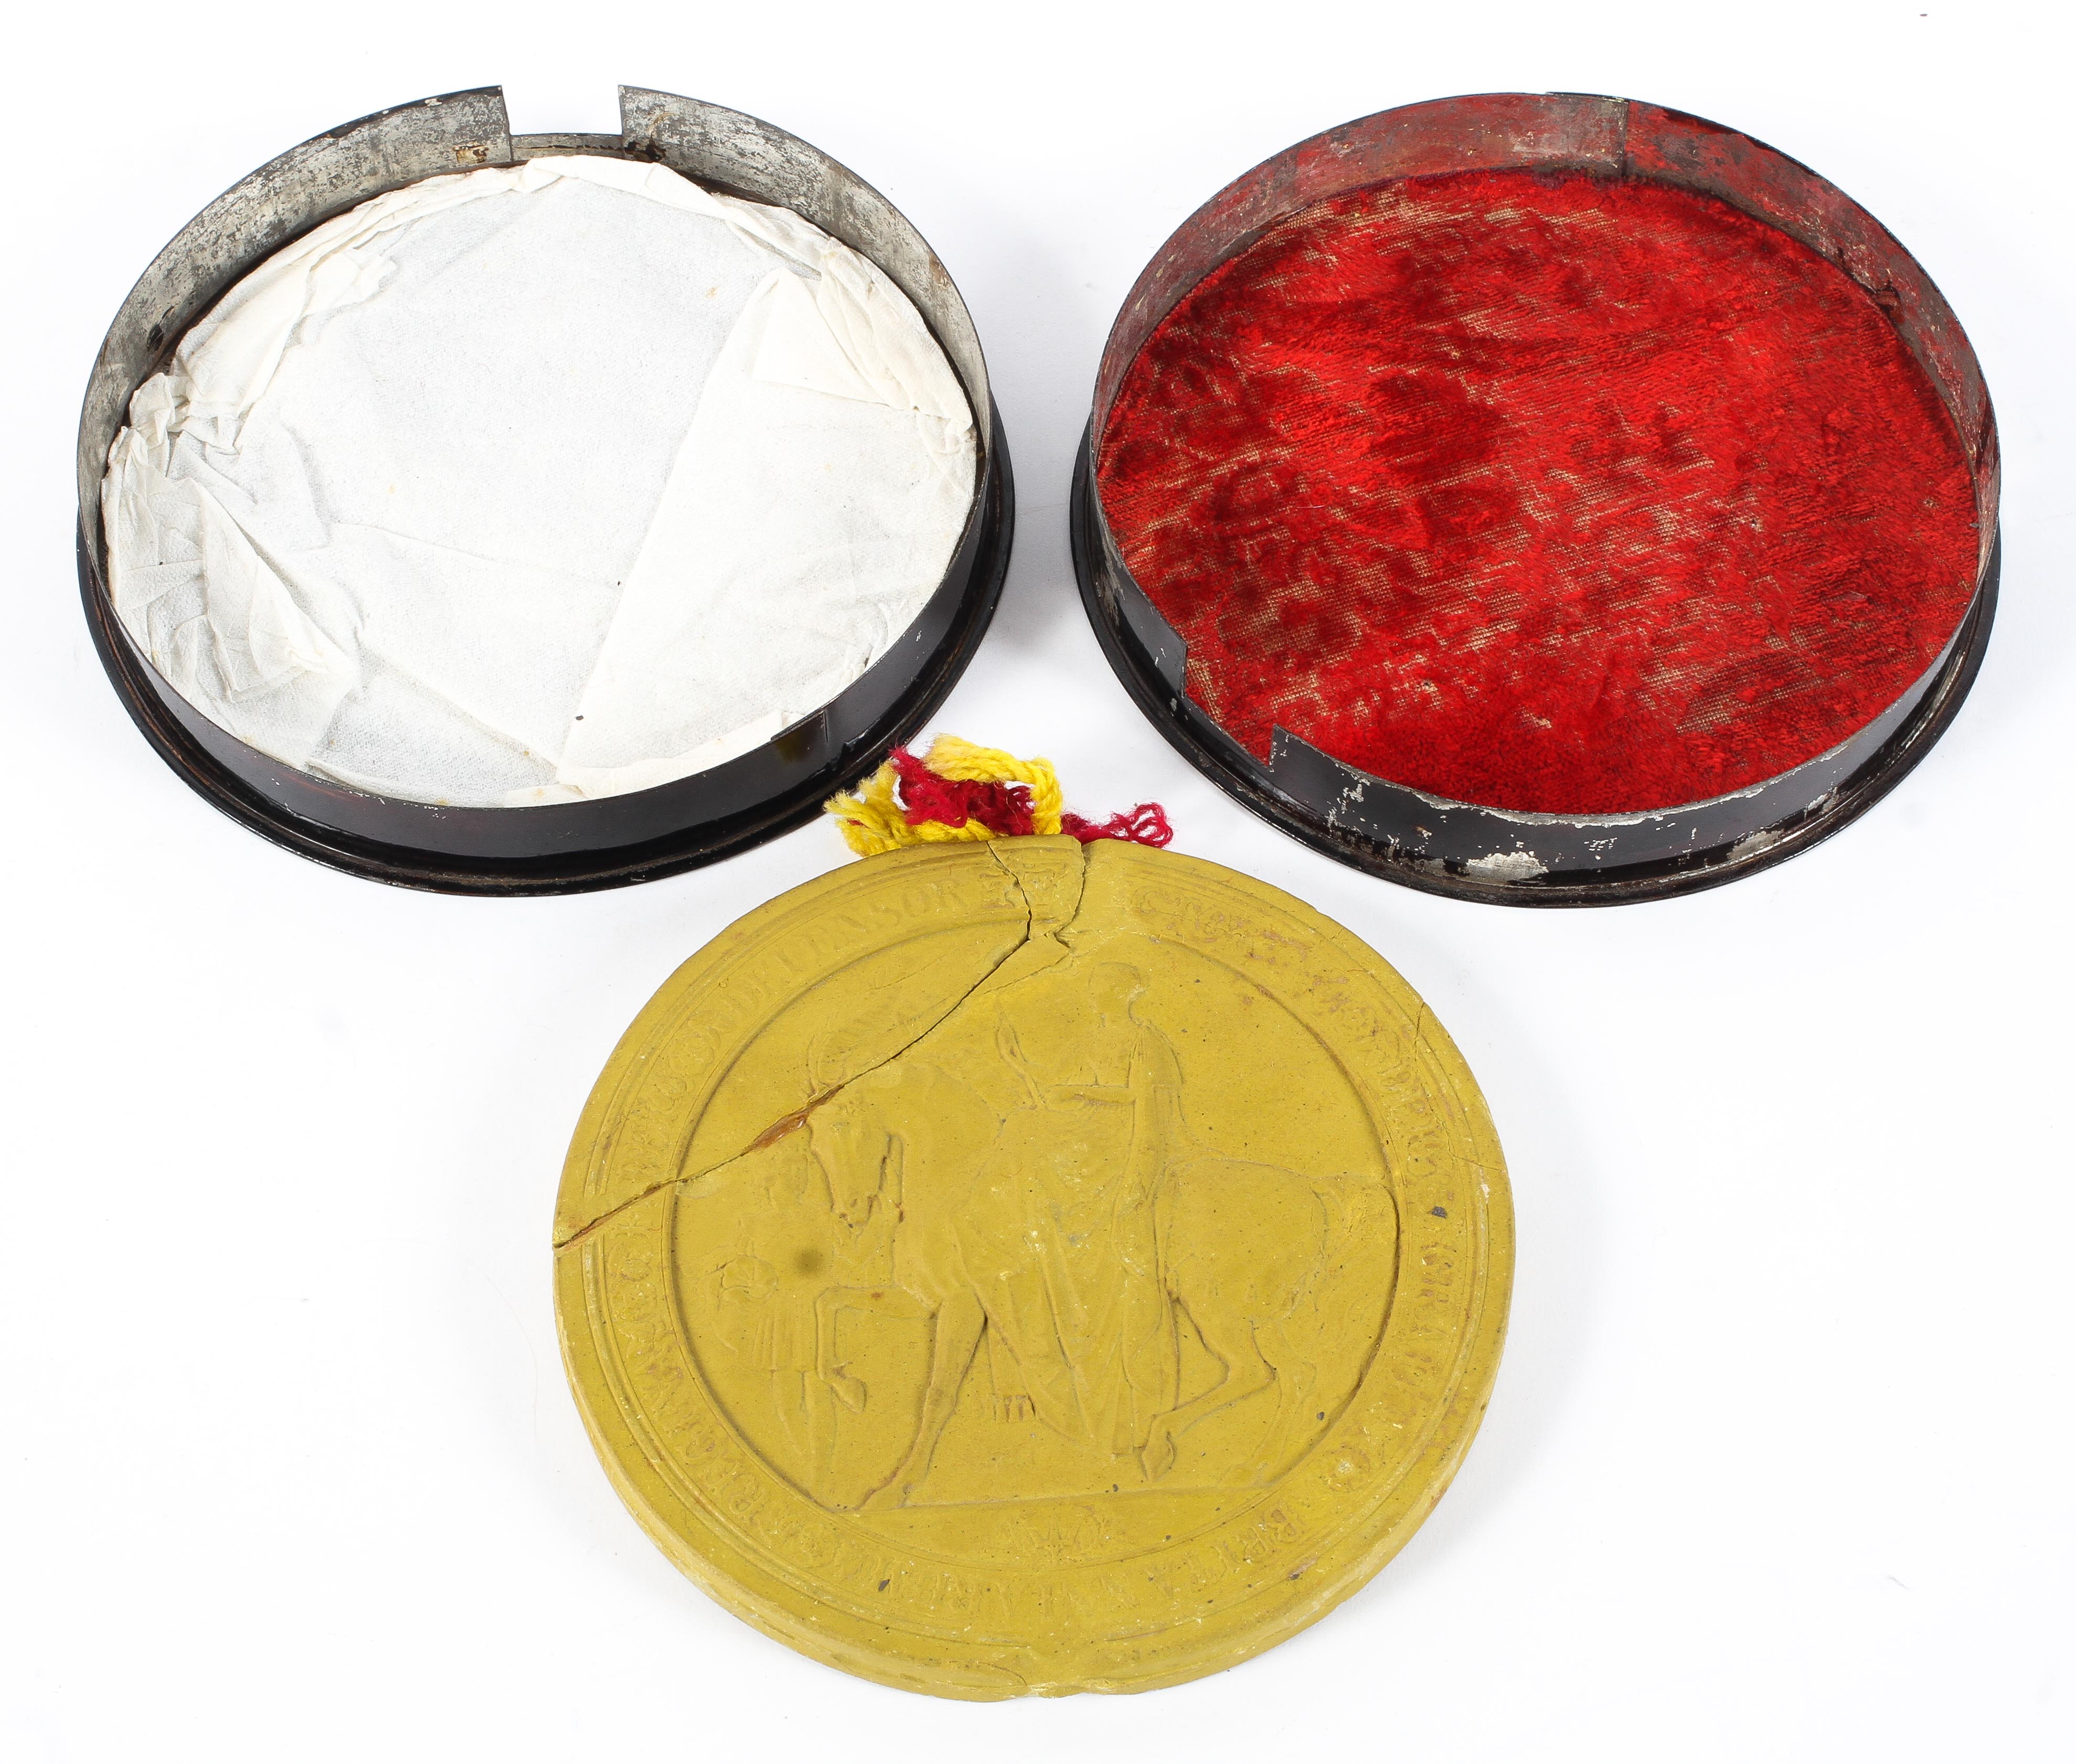 A Queen Victoria 'Great Seal of the Realm' and a handkerchief marked 'A Souvenir of the Record